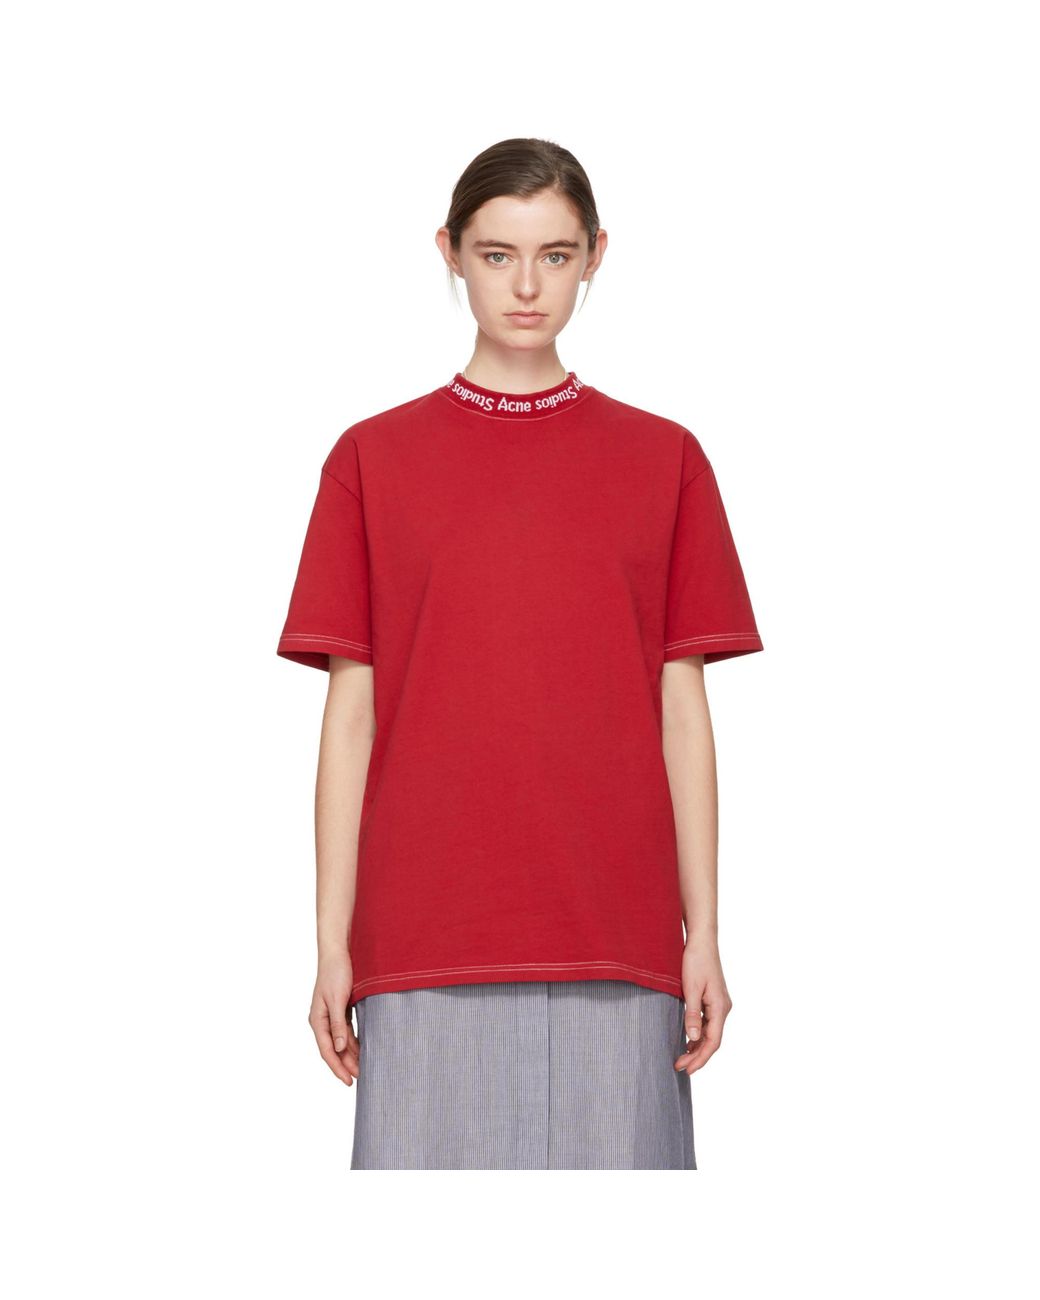 Acne Studios Red Gojina Dyed T-shirt | Lyst Canada